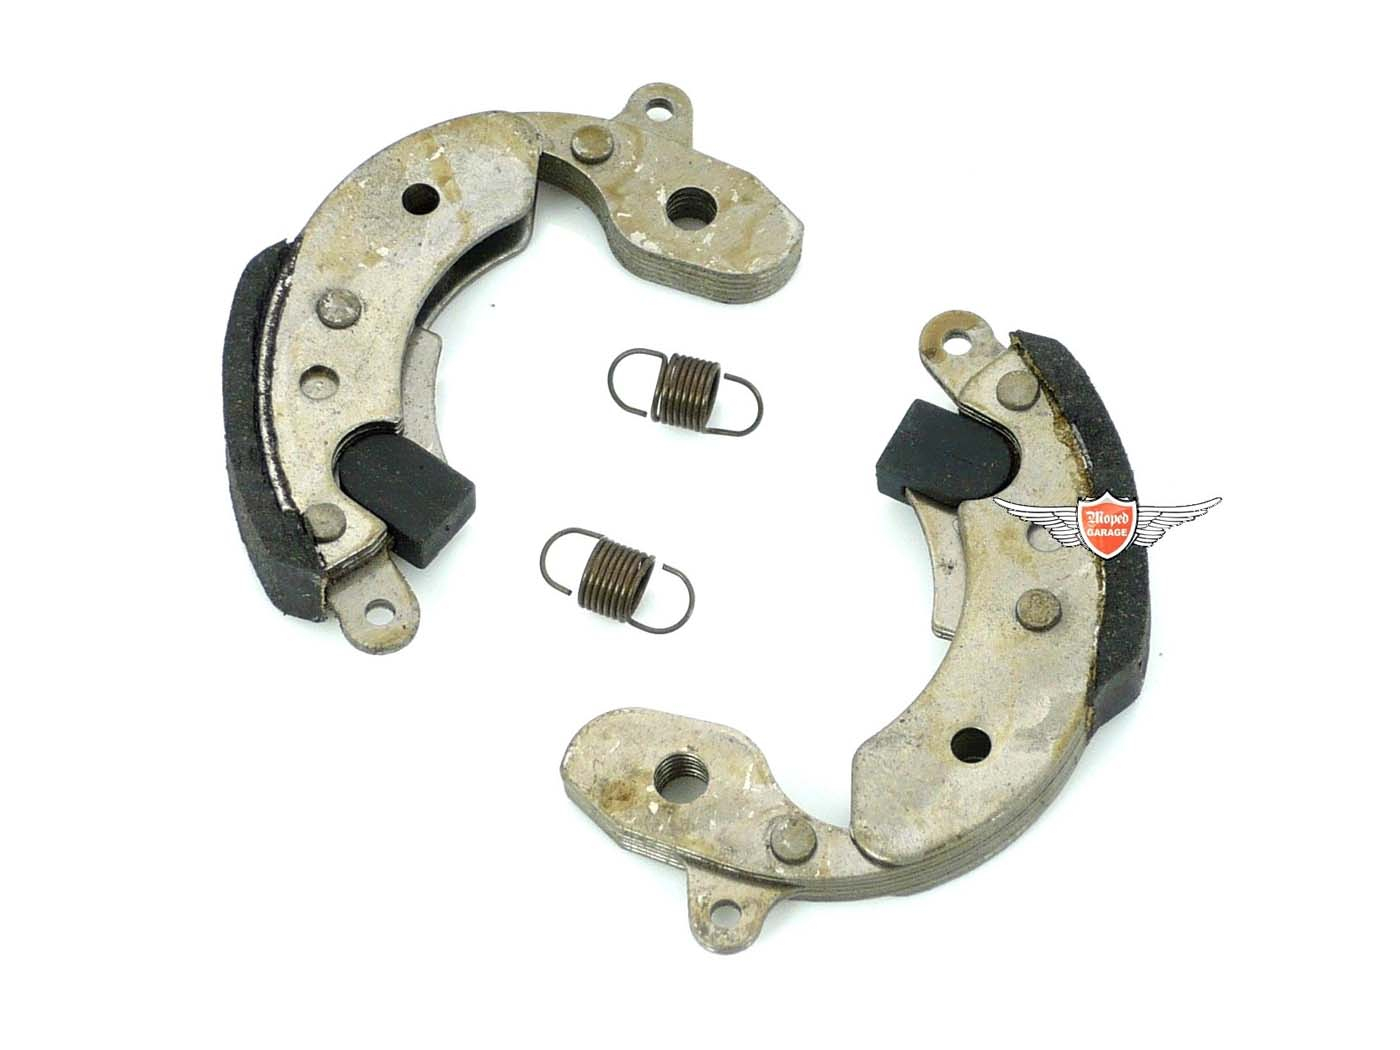 Spinner Jaw Starting Clutch For Piaggio Ciao, Si Moped Moped